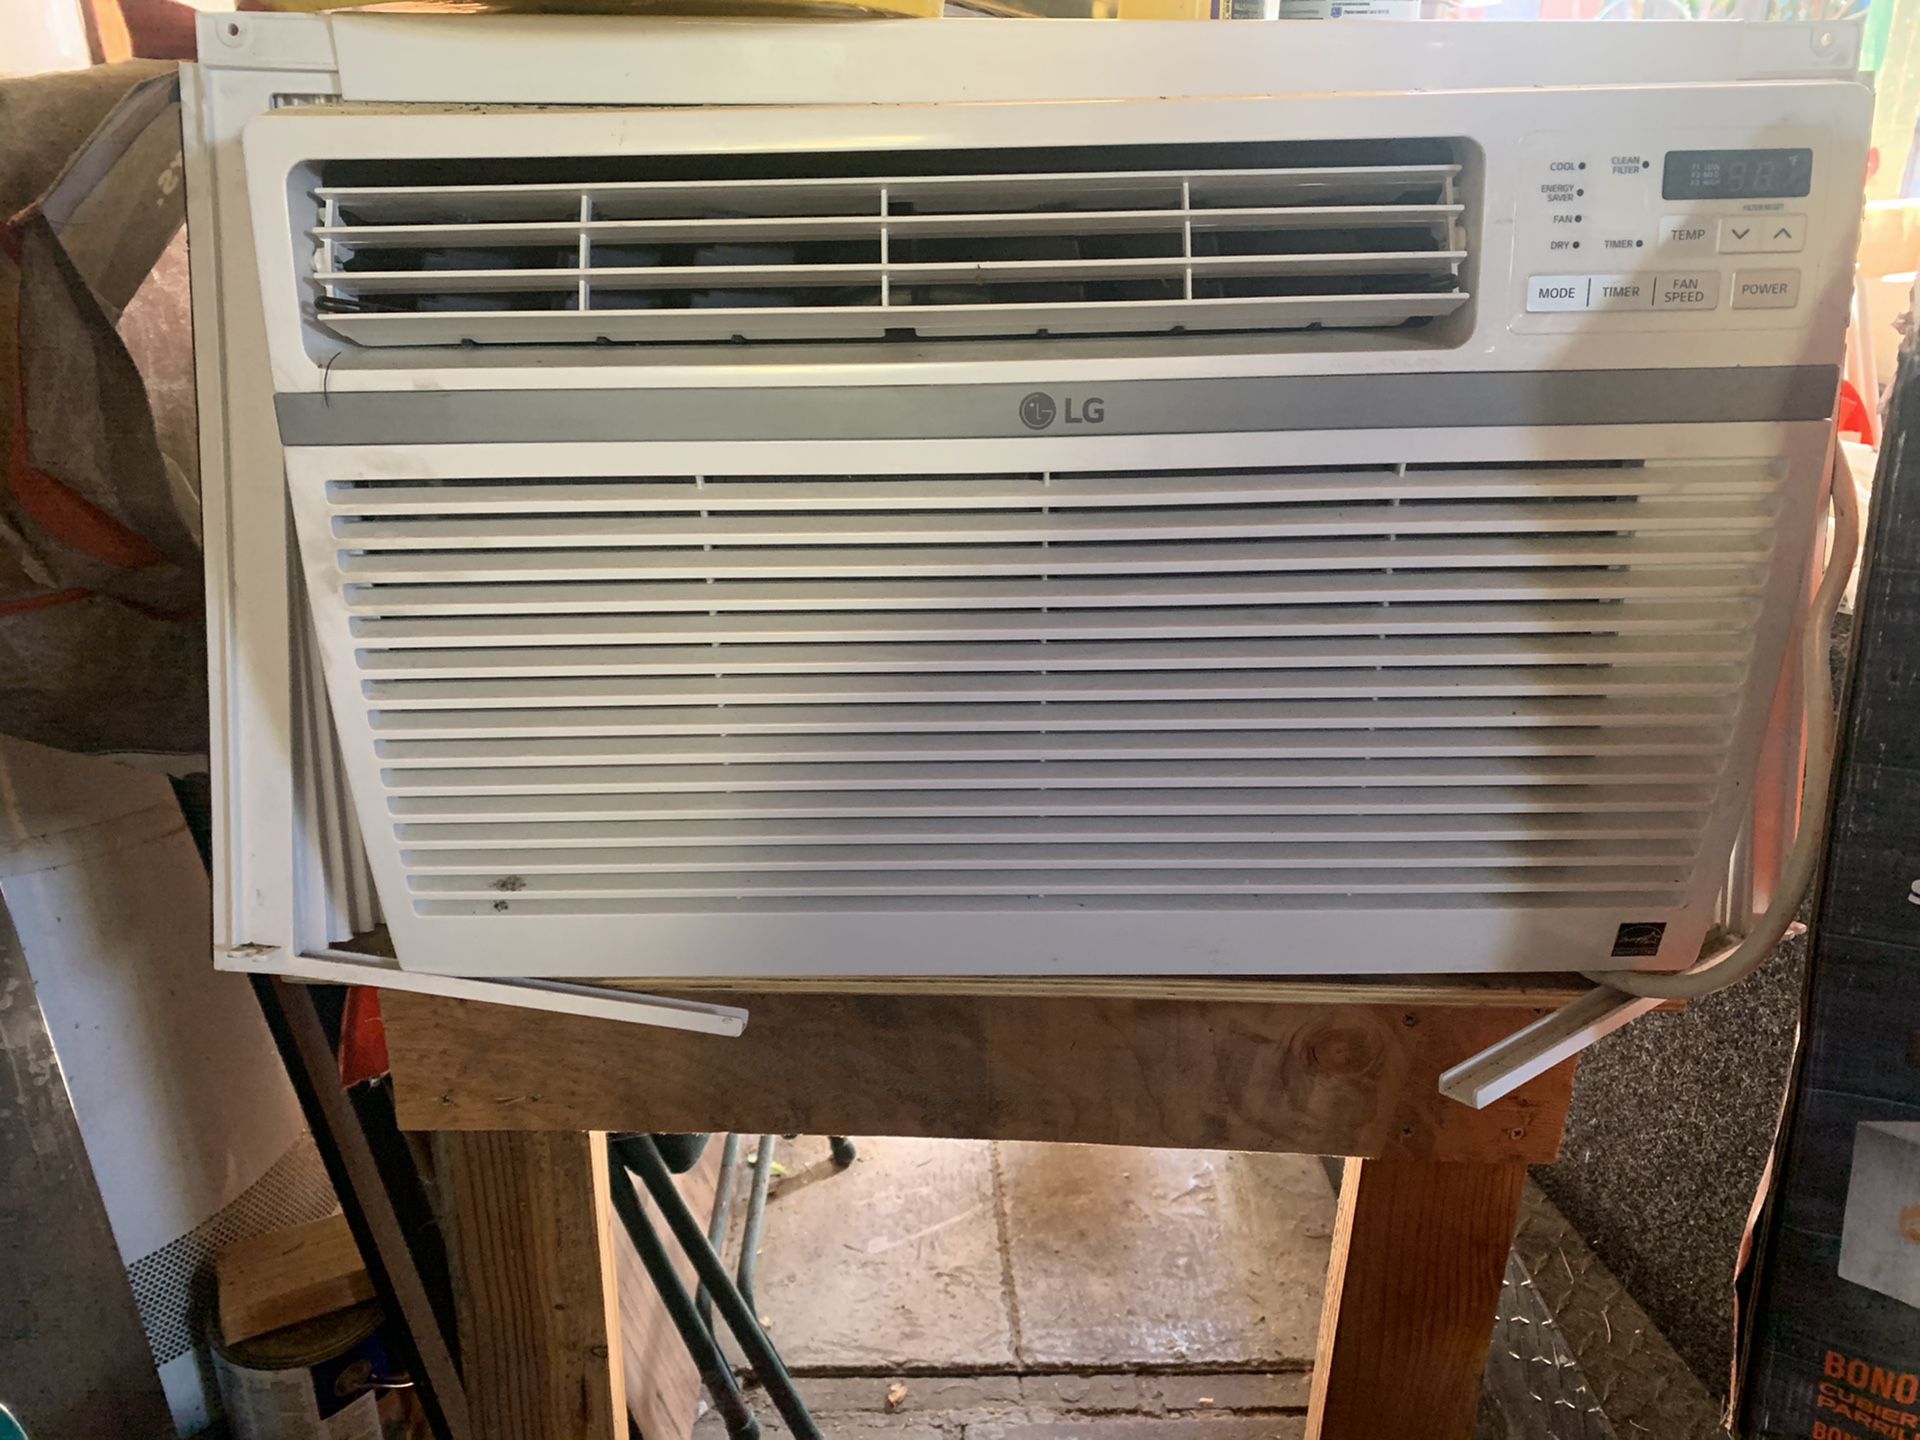 Ac unit for home 1 month used $200 or best offer